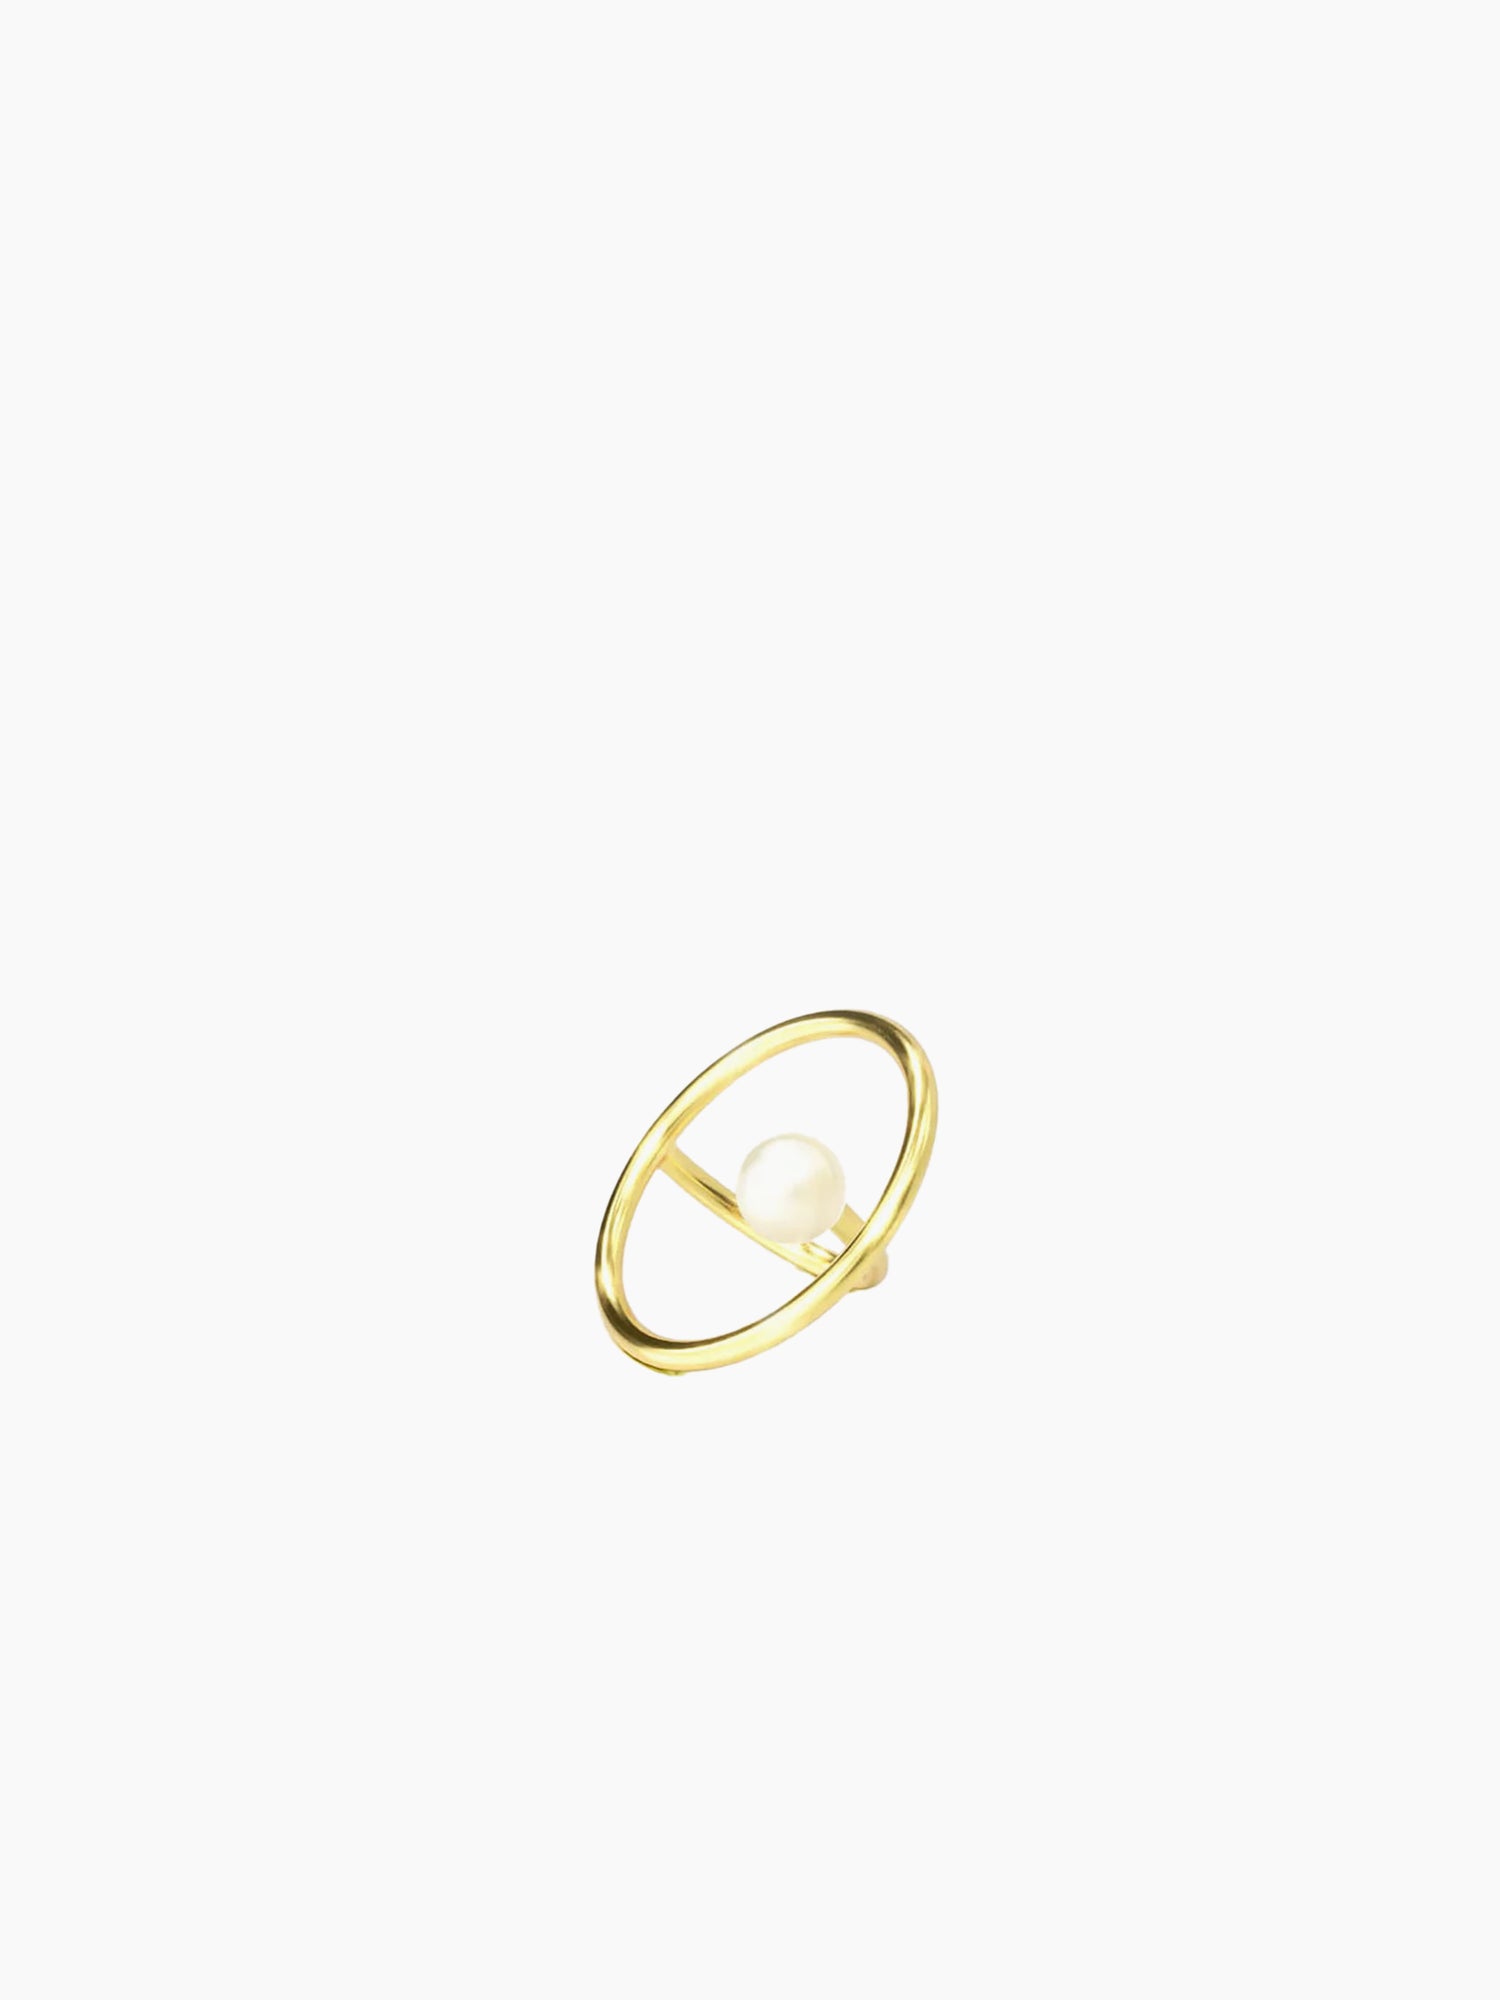 MAM Circular Gold Ring with Pearl